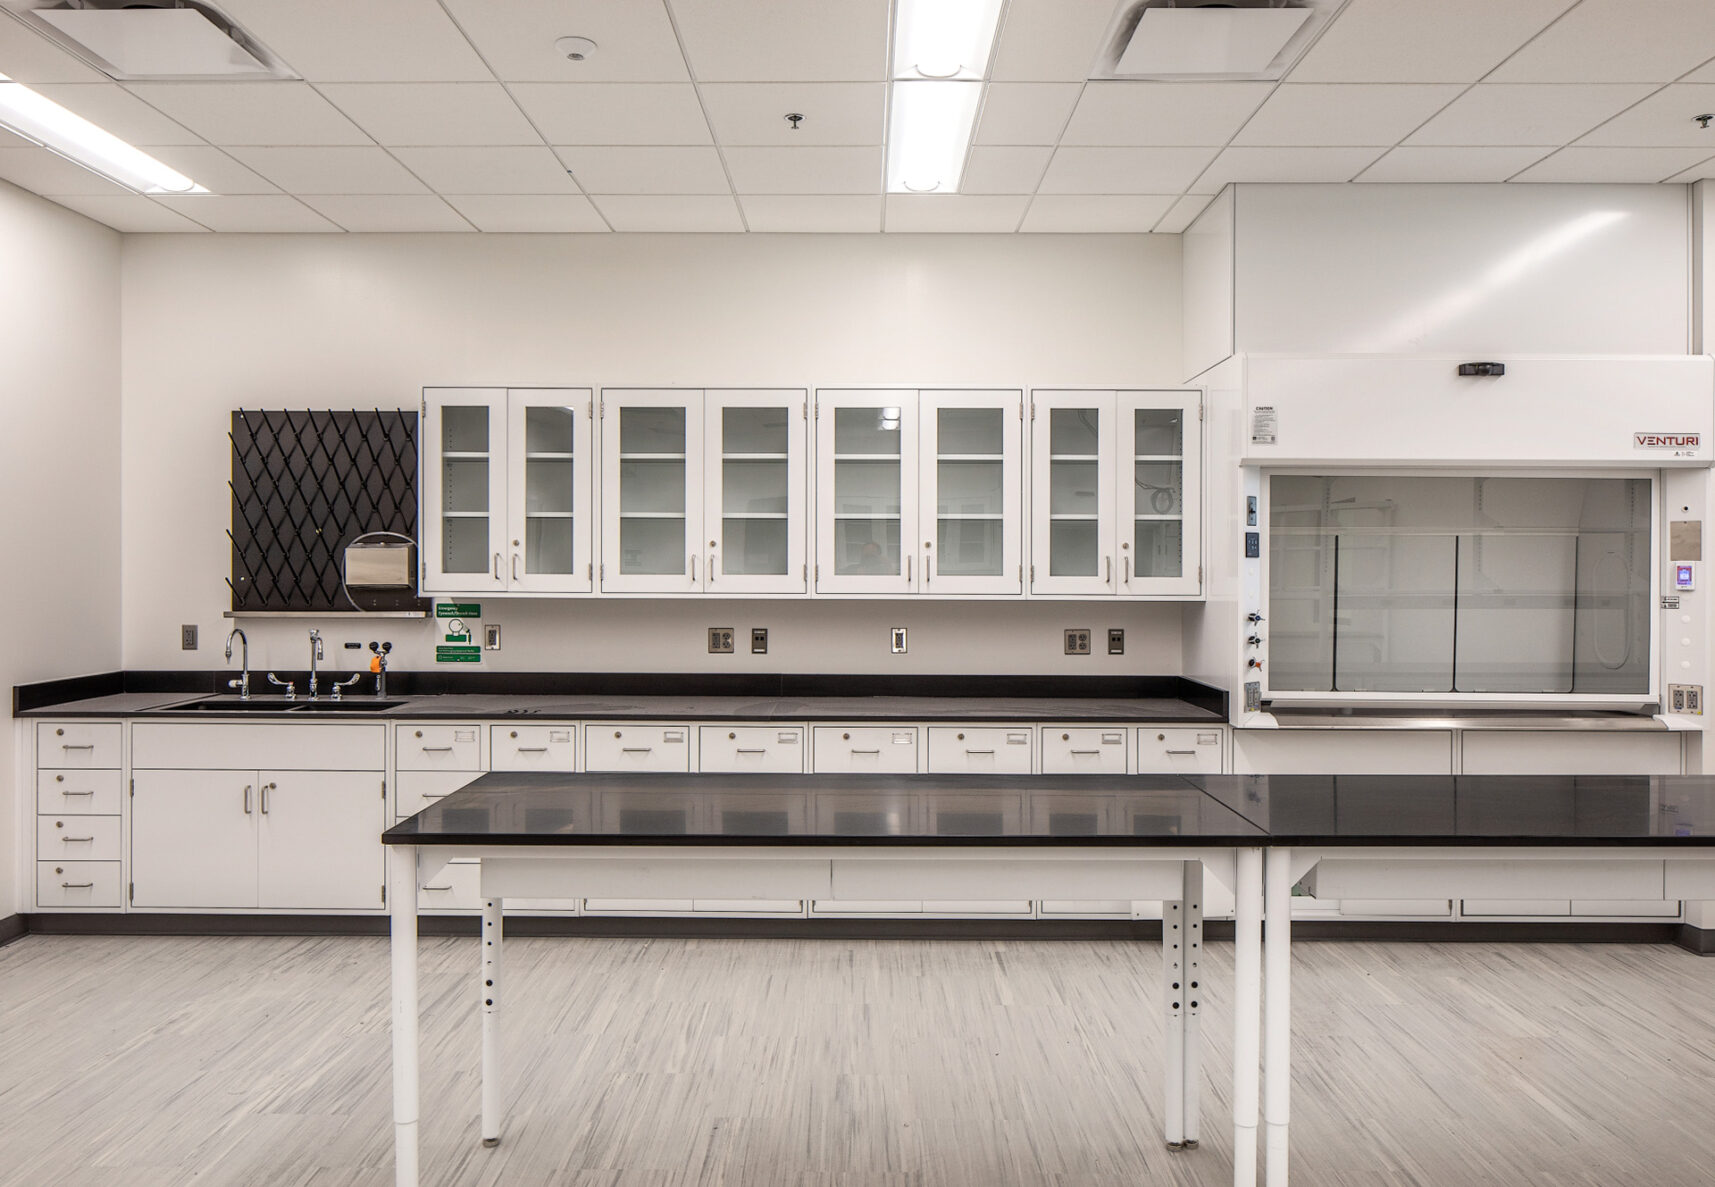 Labs at the POET Bioproducts Institute at SOuth Dakota State University built by McCownGordon Construction